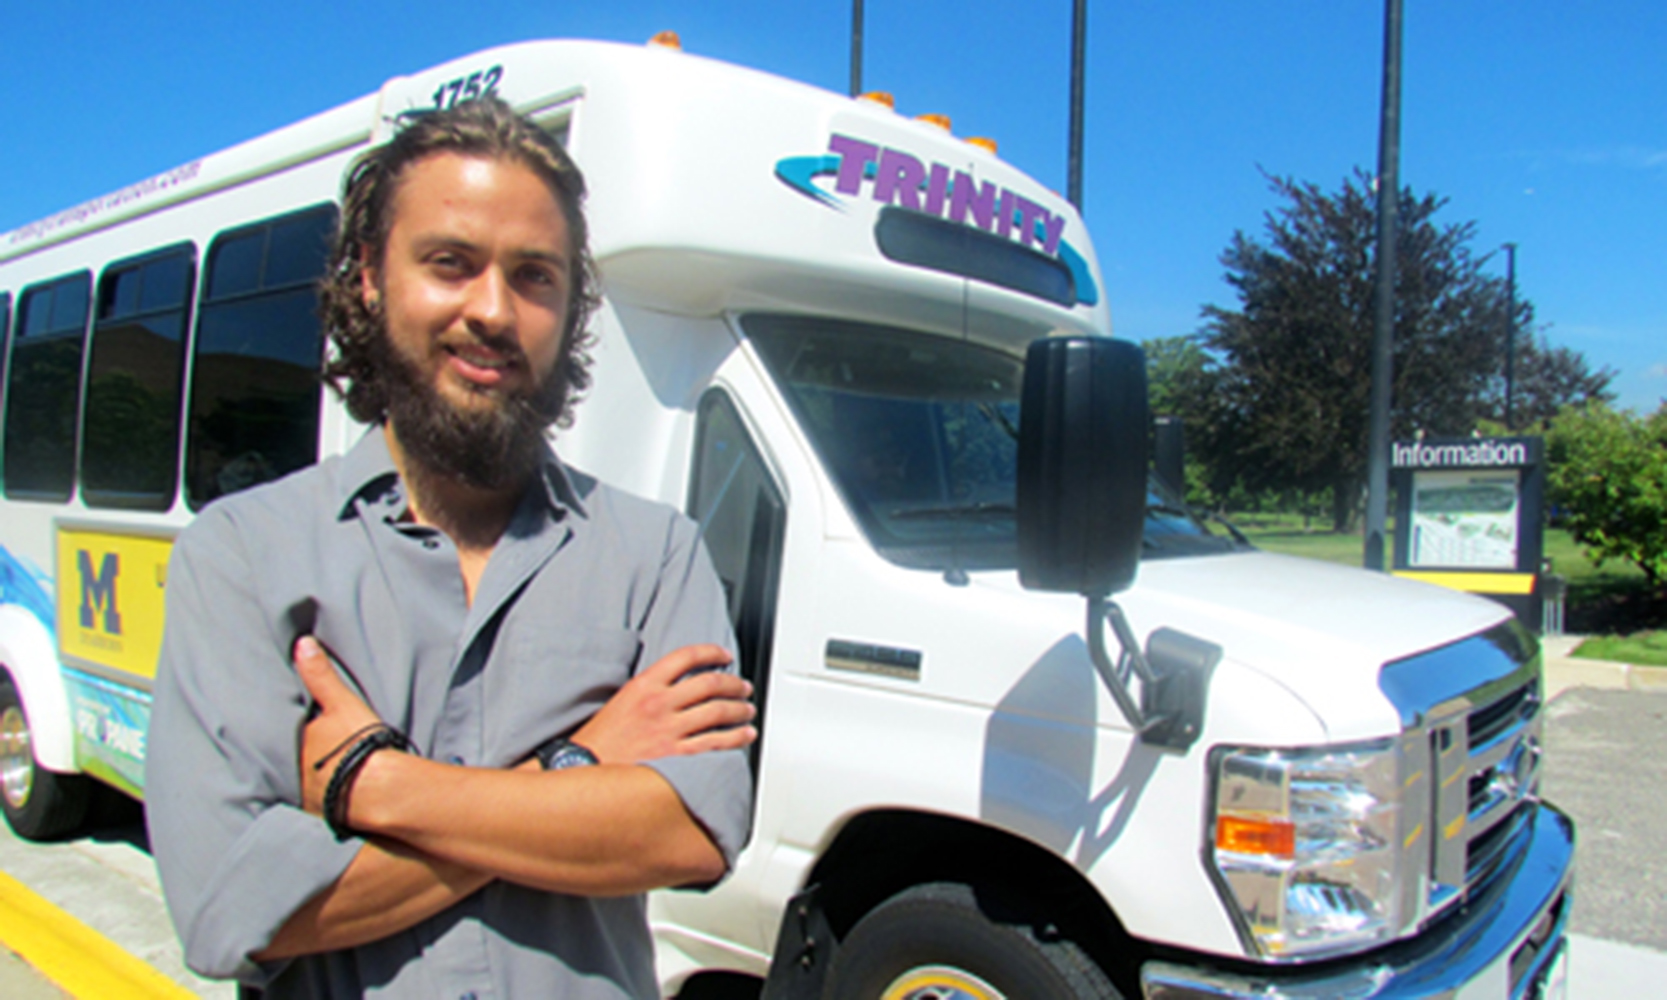 Thomaz is a young, Latinx man with tanned skin, green eyes, and dark brown, chin-length curly hair & facial hair. He is smiling, standing in front of a UM-Dearborn Trinity Bus with his arms crossed. Thomaz is wearing a light-gray button down with the sleeves rolled up.